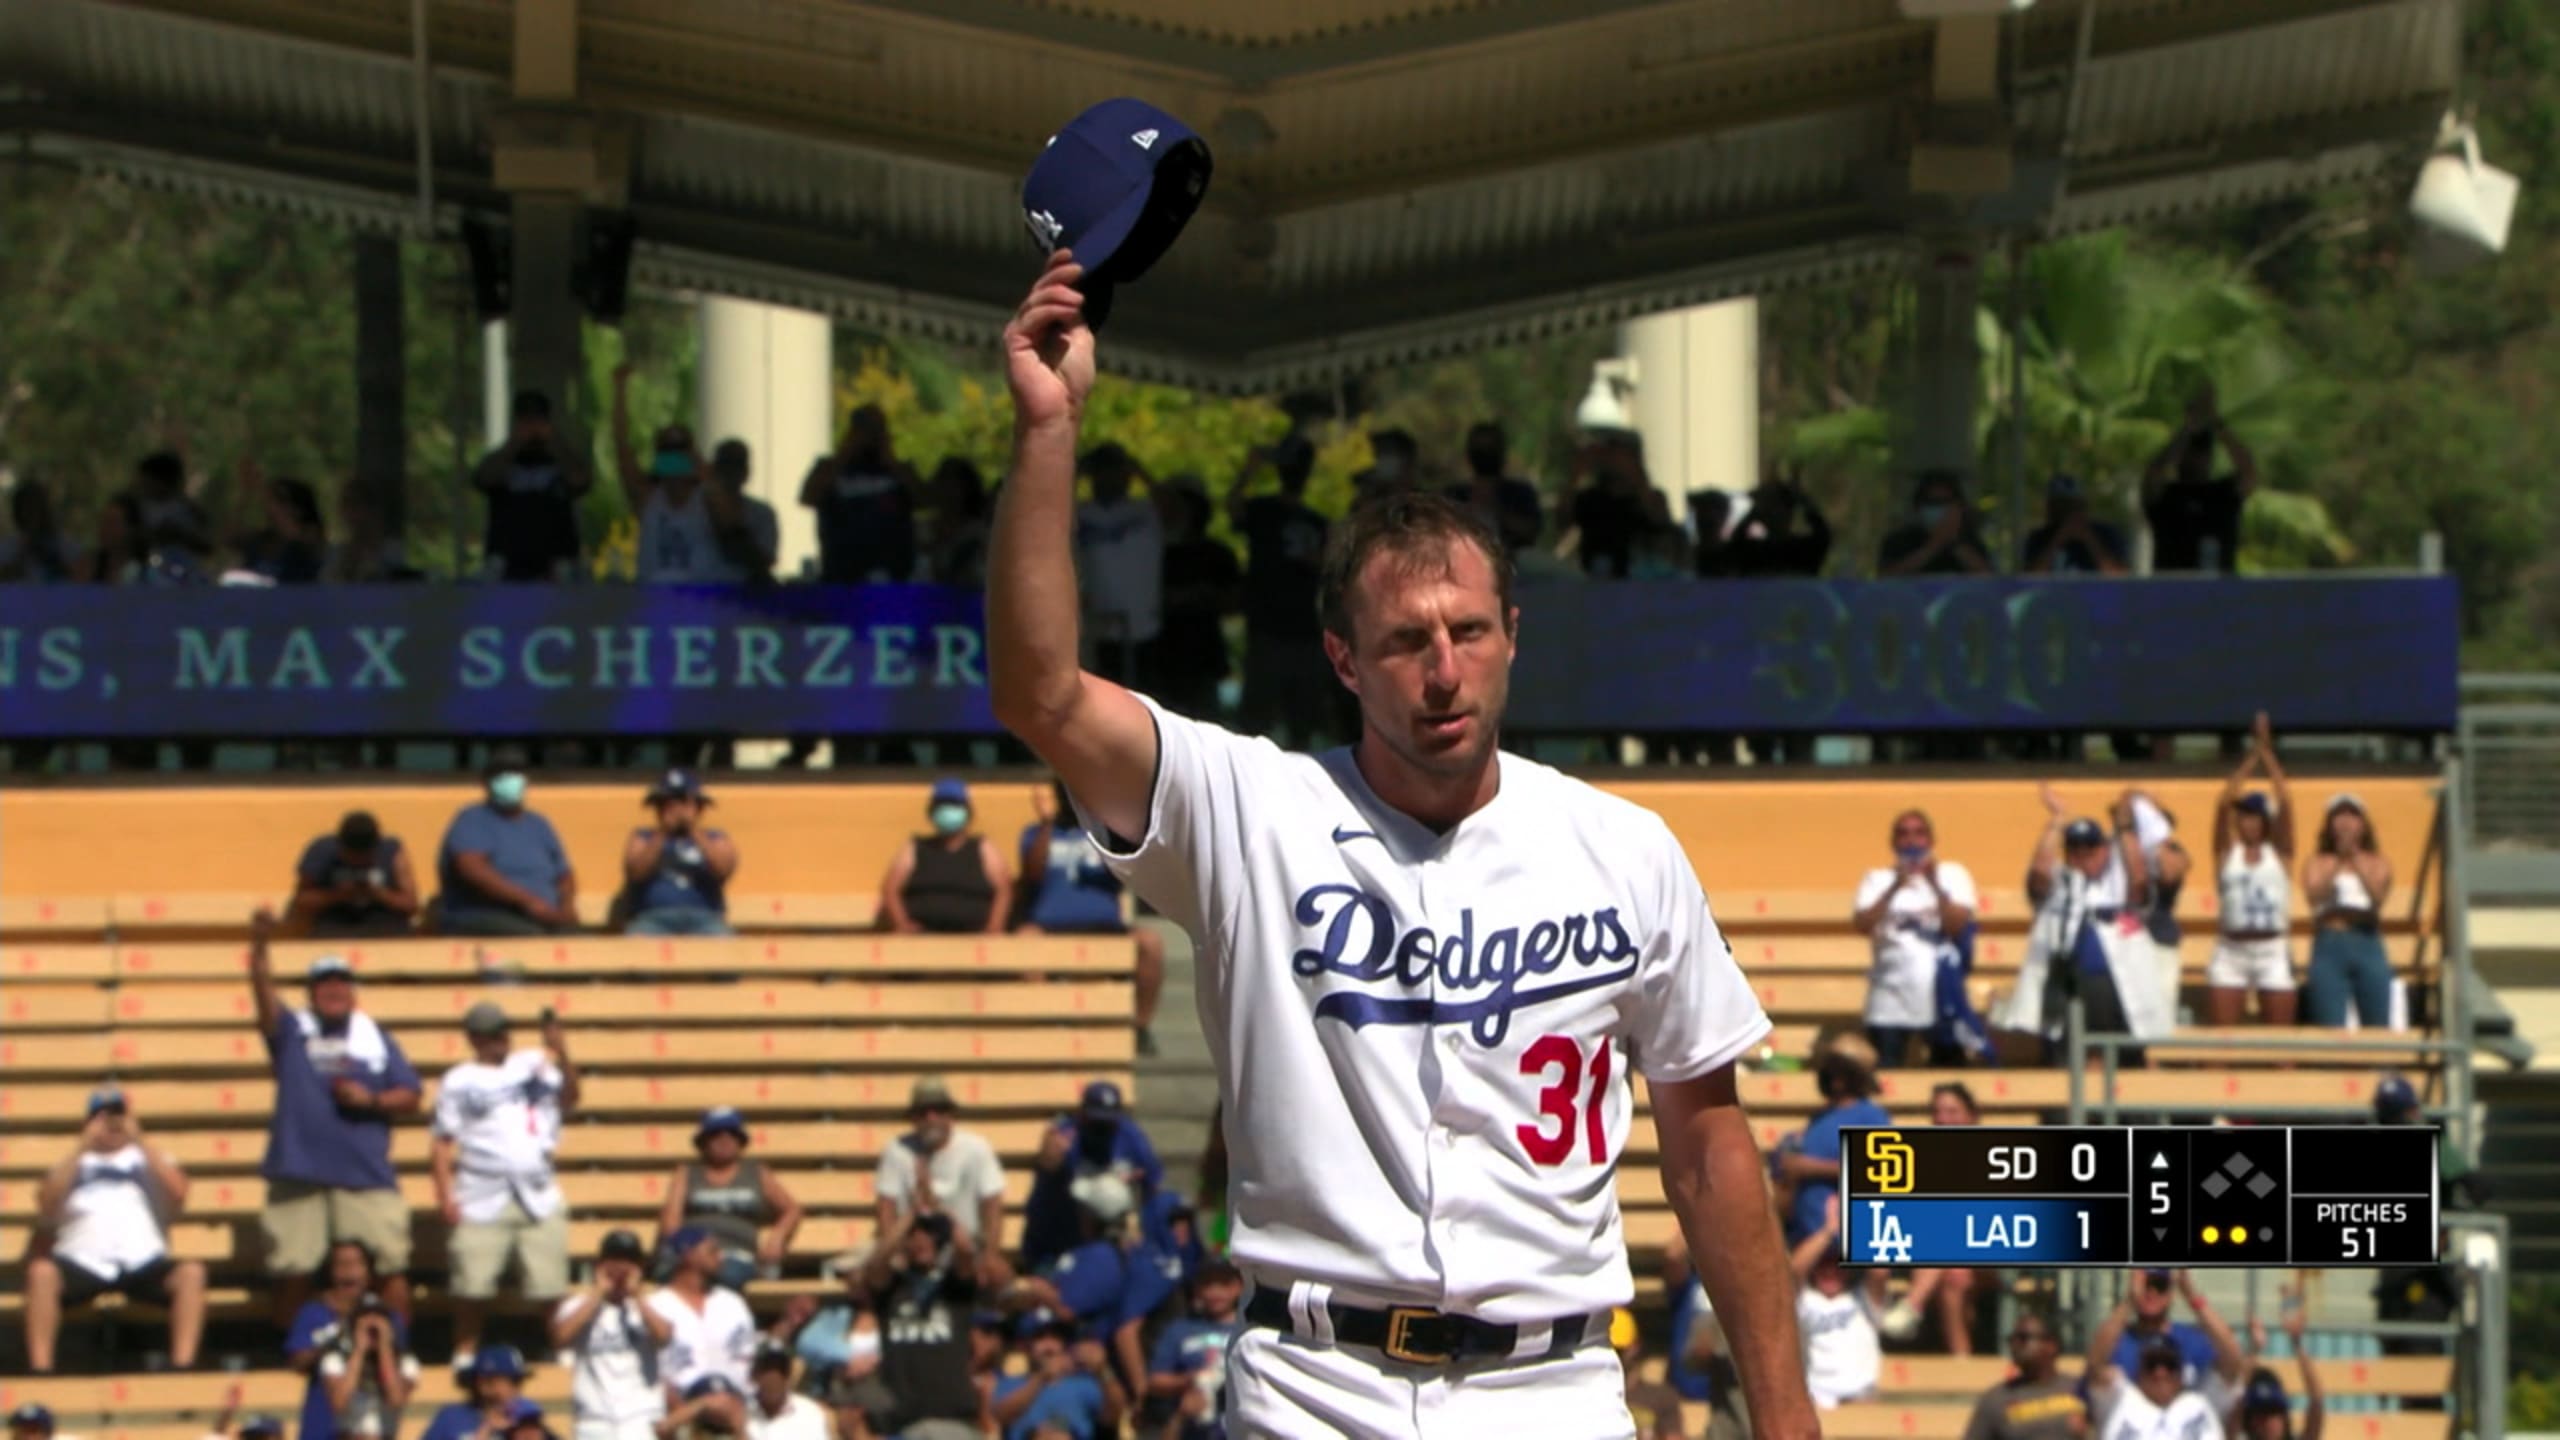 Dodgers beat Giants: Max Scherzer closes out epic playoff series